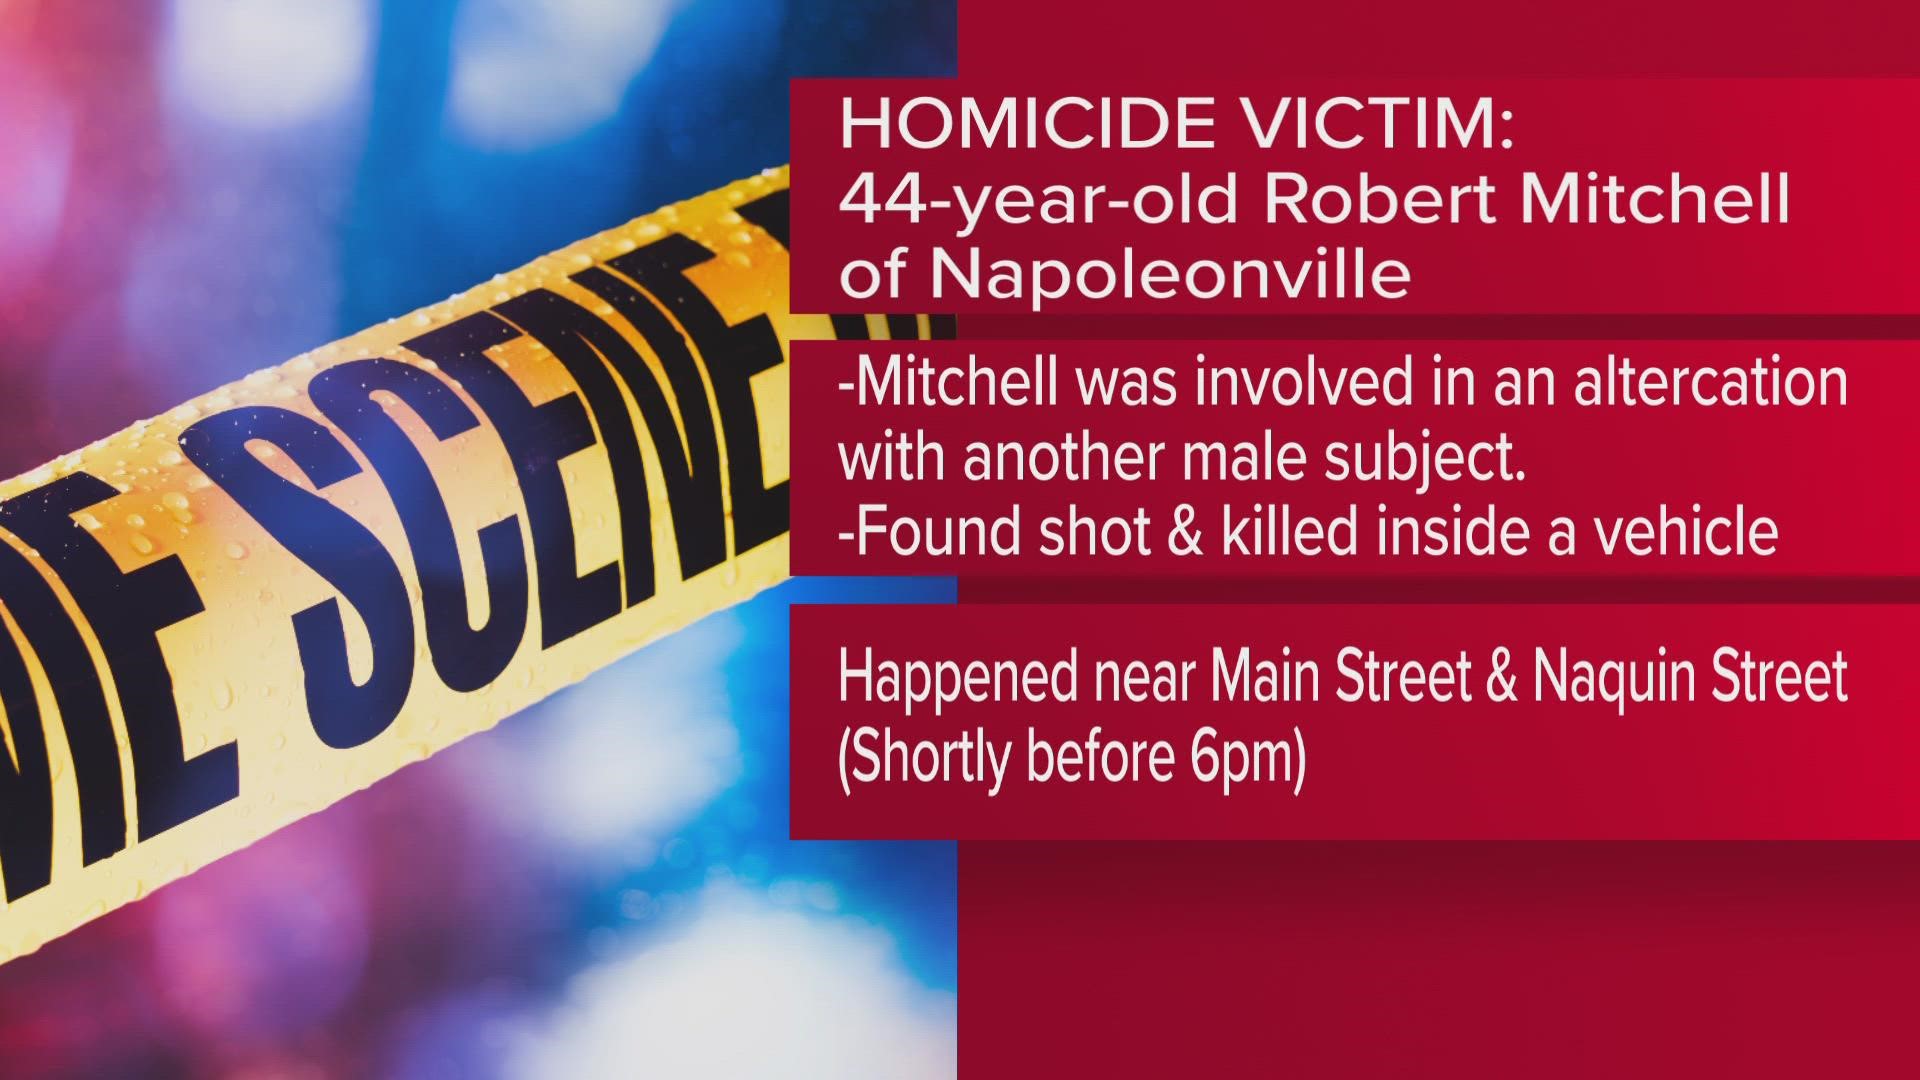 The victim has been identified as 44-year-old Robert Mitchell.